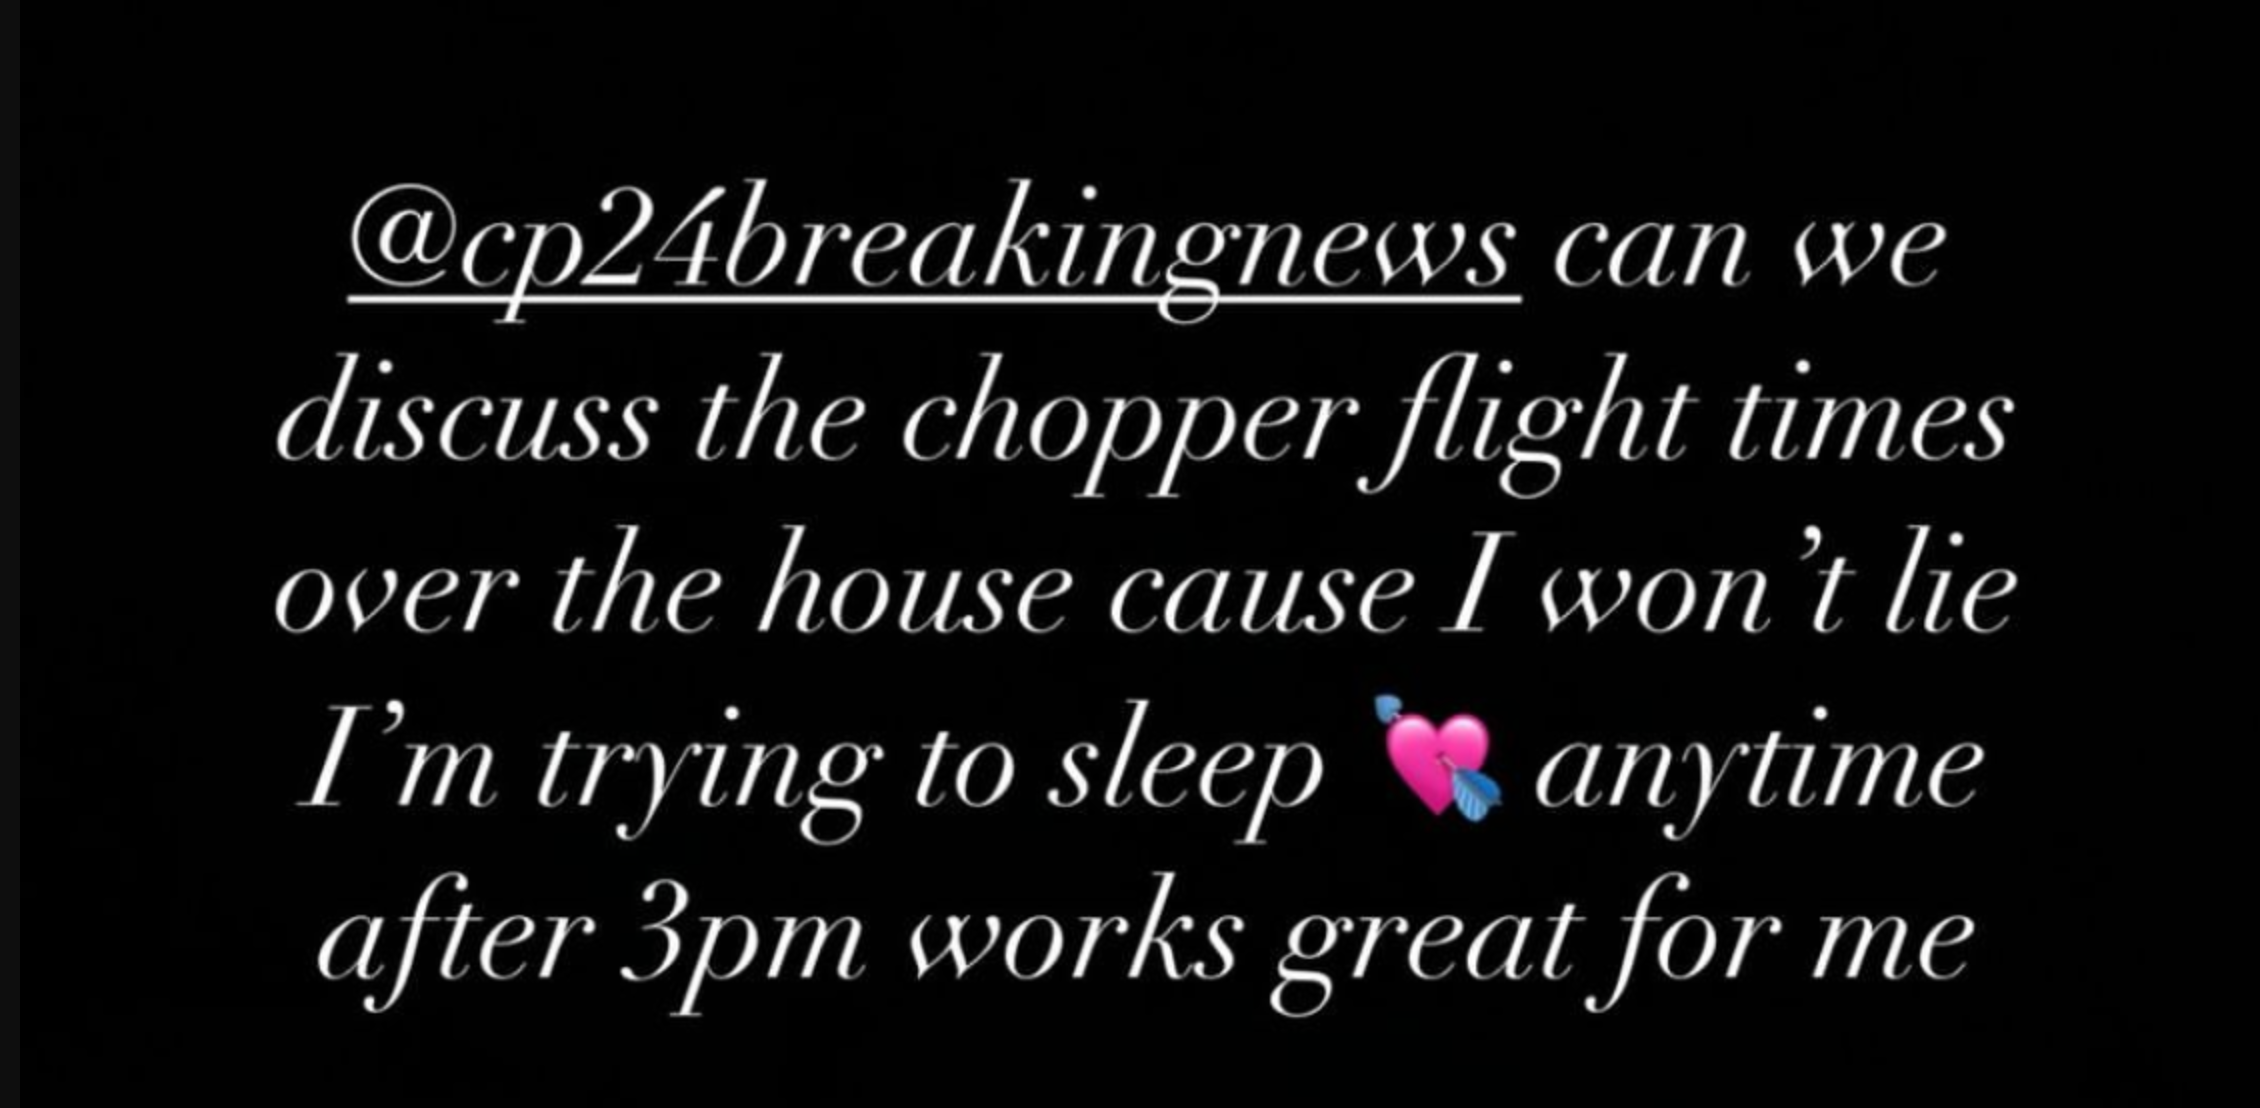 Drake issued a plea to Canadian news organisation CP24 to change its helicopter flight times, saying it is keeping him awake